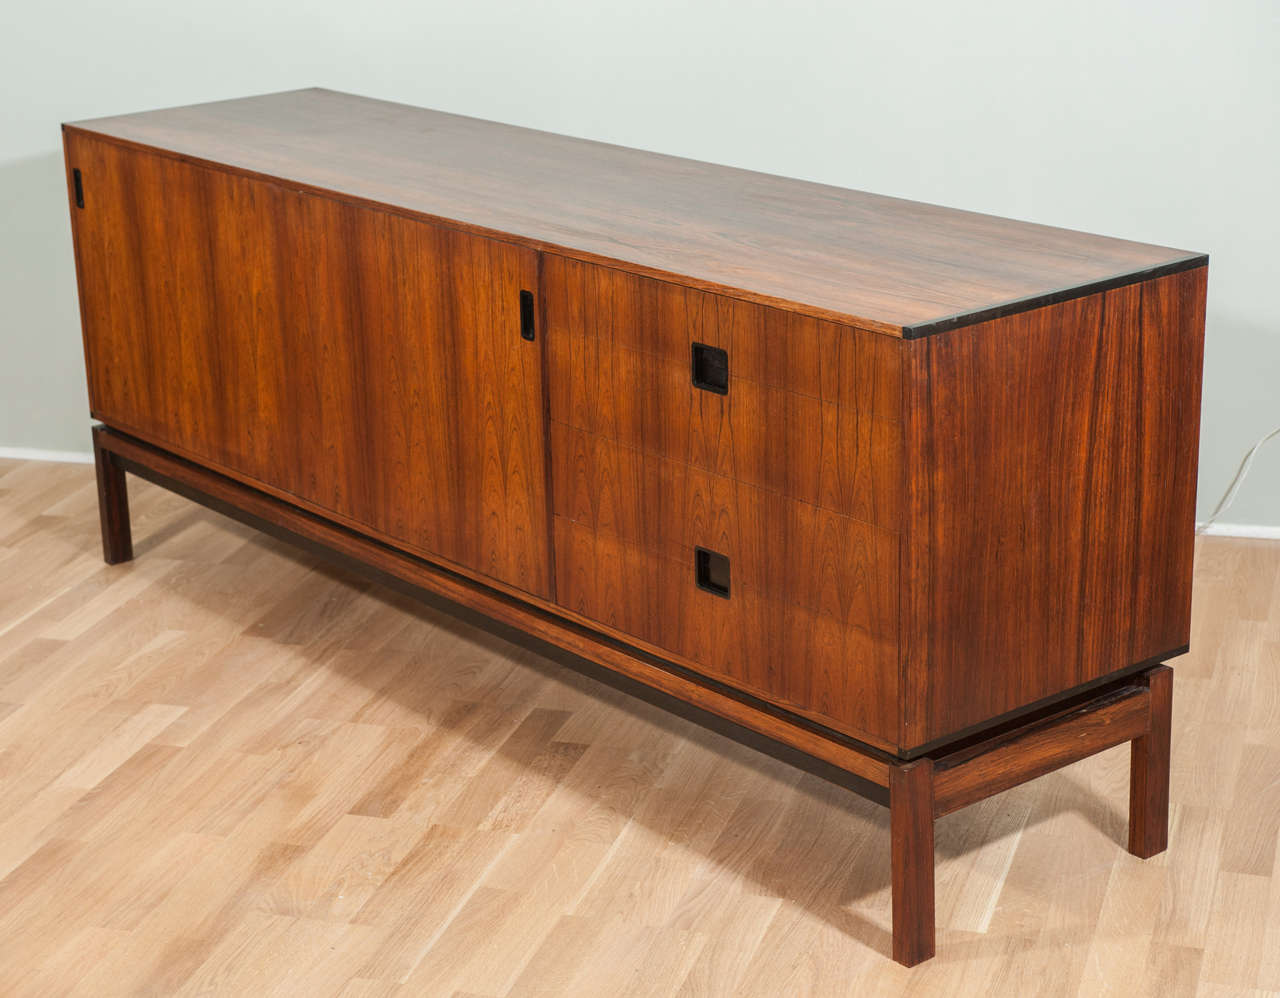 A beautifully designed and made credenza with rich rosewood grain and ebony coloured details.